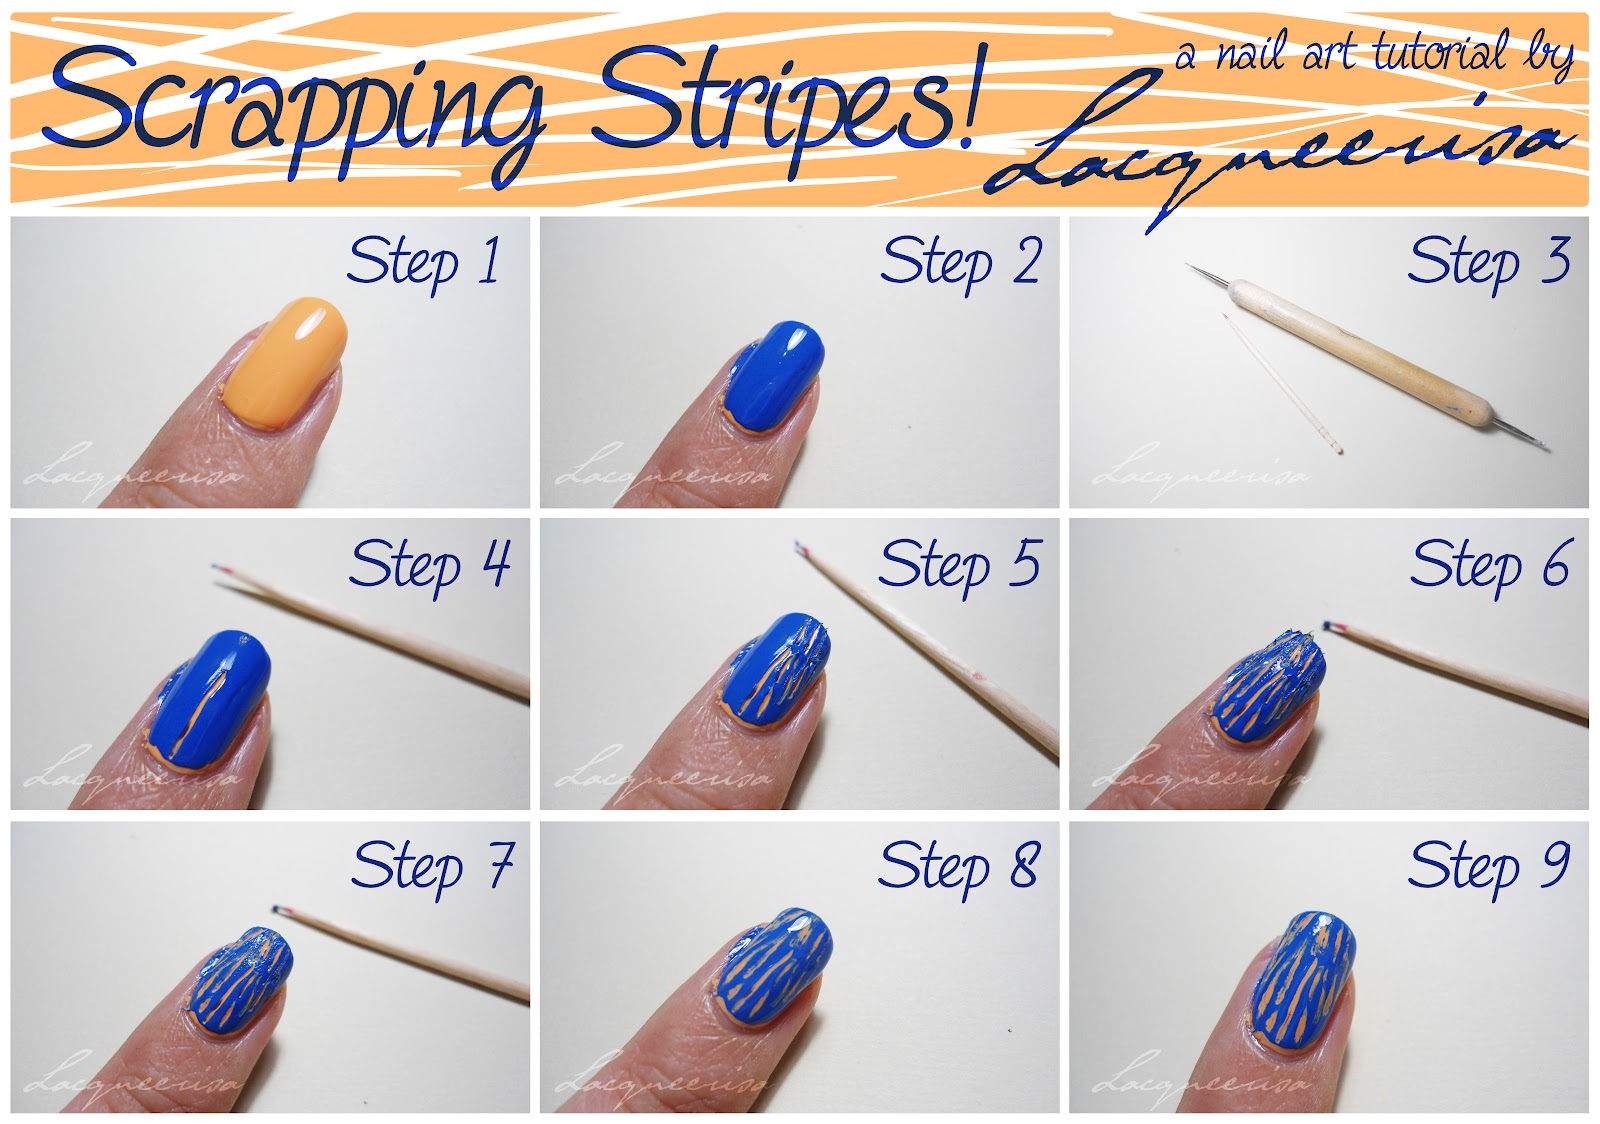 6. Floral Nail Art Tutorial with Dotting Tool - wide 4